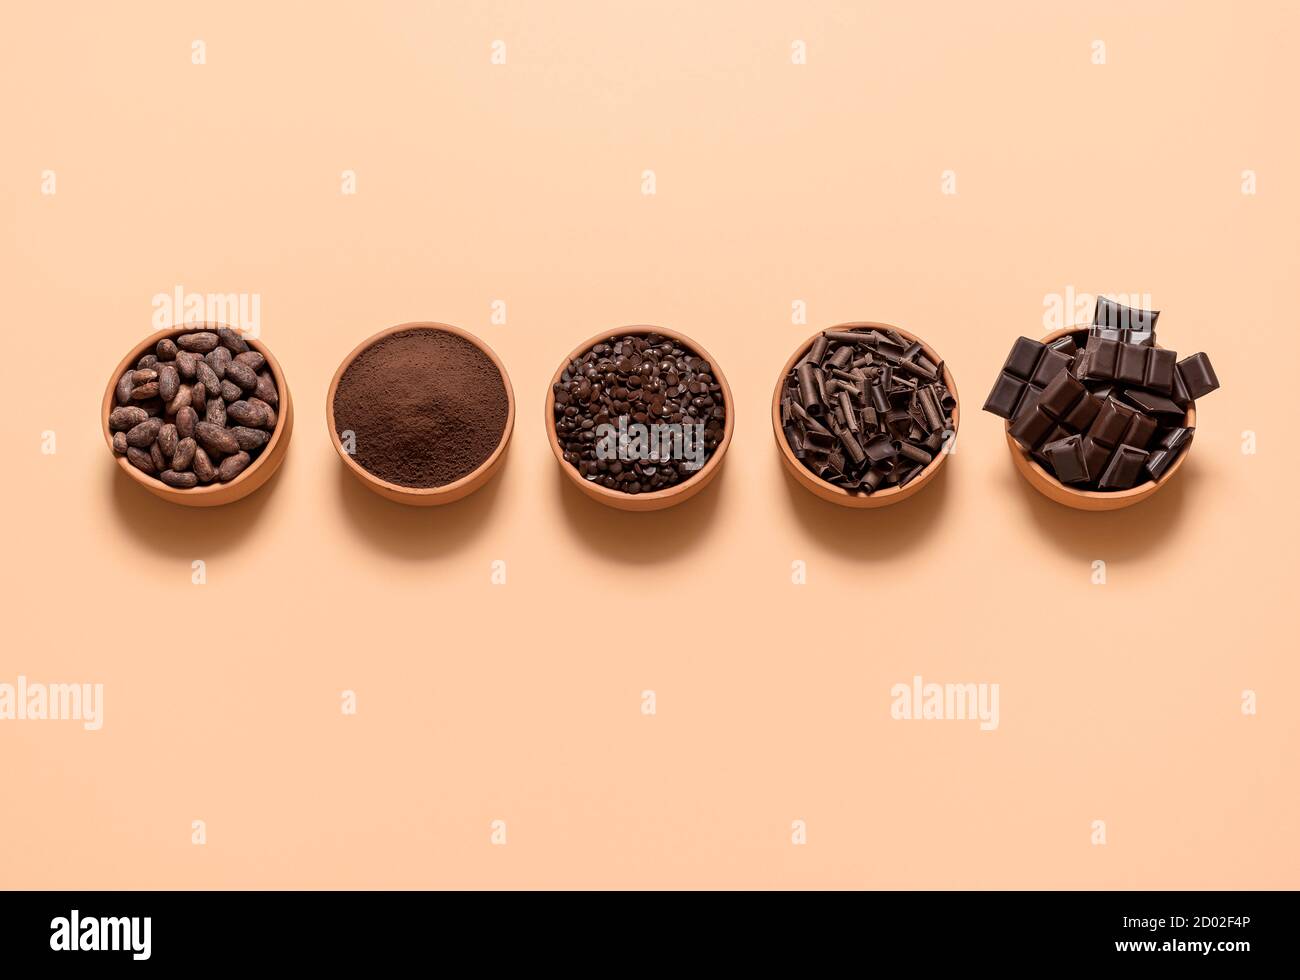 Chocolate ingredients, cacao beans, cocoa powder, chocolate chunks in bowls, isolated on a beige background. Flat lay with cocoa and dark chocolate. Stock Photo